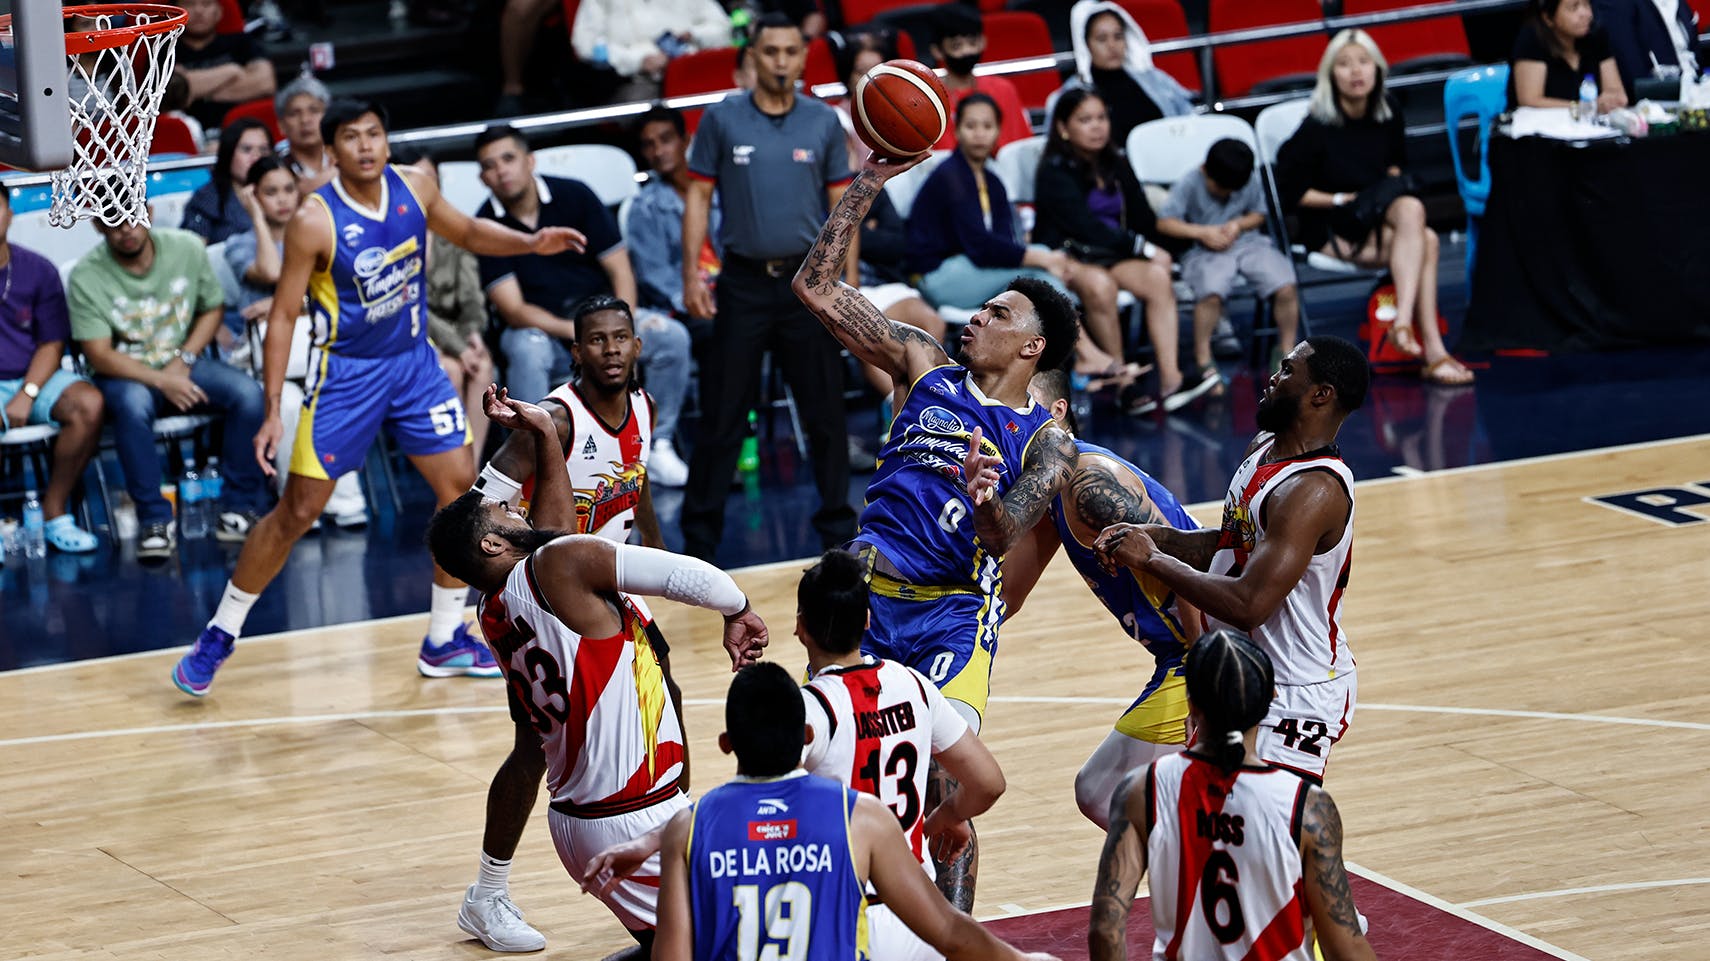 Sigh of relief as Magnolia survives June Mar Fajardo-less San Miguel to stay unbeaten in PBA Commissioner